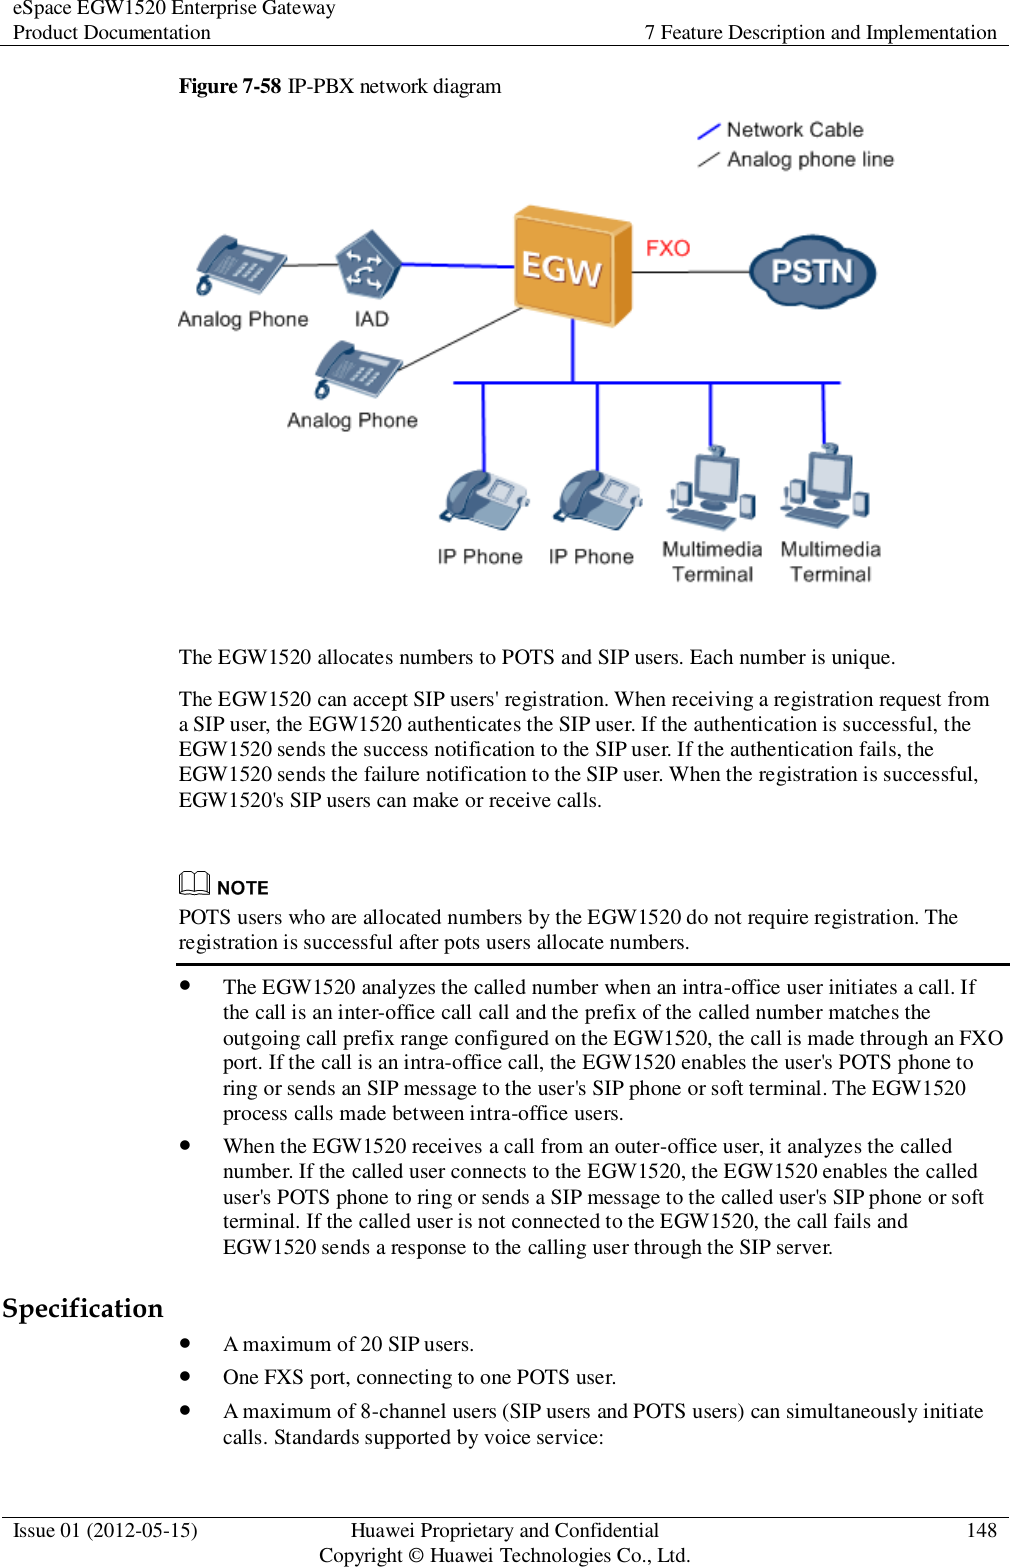 eSpace EGW1520 Enterprise Gateway Product Documentation 7 Feature Description and Implementation  Issue 01 (2012-05-15) Huawei Proprietary and Confidential                                     Copyright © Huawei Technologies Co., Ltd. 148  Figure 7-58 IP-PBX network diagram   The EGW1520 allocates numbers to POTS and SIP users. Each number is unique. The EGW1520 can accept SIP users&apos; registration. When receiving a registration request from a SIP user, the EGW1520 authenticates the SIP user. If the authentication is successful, the EGW1520 sends the success notification to the SIP user. If the authentication fails, the EGW1520 sends the failure notification to the SIP user. When the registration is successful, EGW1520&apos;s SIP users can make or receive calls.   POTS users who are allocated numbers by the EGW1520 do not require registration. The registration is successful after pots users allocate numbers.  The EGW1520 analyzes the called number when an intra-office user initiates a call. If the call is an inter-office call call and the prefix of the called number matches the outgoing call prefix range configured on the EGW1520, the call is made through an FXO port. If the call is an intra-office call, the EGW1520 enables the user&apos;s POTS phone to ring or sends an SIP message to the user&apos;s SIP phone or soft terminal. The EGW1520 process calls made between intra-office users.  When the EGW1520 receives a call from an outer-office user, it analyzes the called number. If the called user connects to the EGW1520, the EGW1520 enables the called user&apos;s POTS phone to ring or sends a SIP message to the called user&apos;s SIP phone or soft terminal. If the called user is not connected to the EGW1520, the call fails and EGW1520 sends a response to the calling user through the SIP server. Specification  A maximum of 20 SIP users.  One FXS port, connecting to one POTS user.  A maximum of 8-channel users (SIP users and POTS users) can simultaneously initiate calls. Standards supported by voice service: 